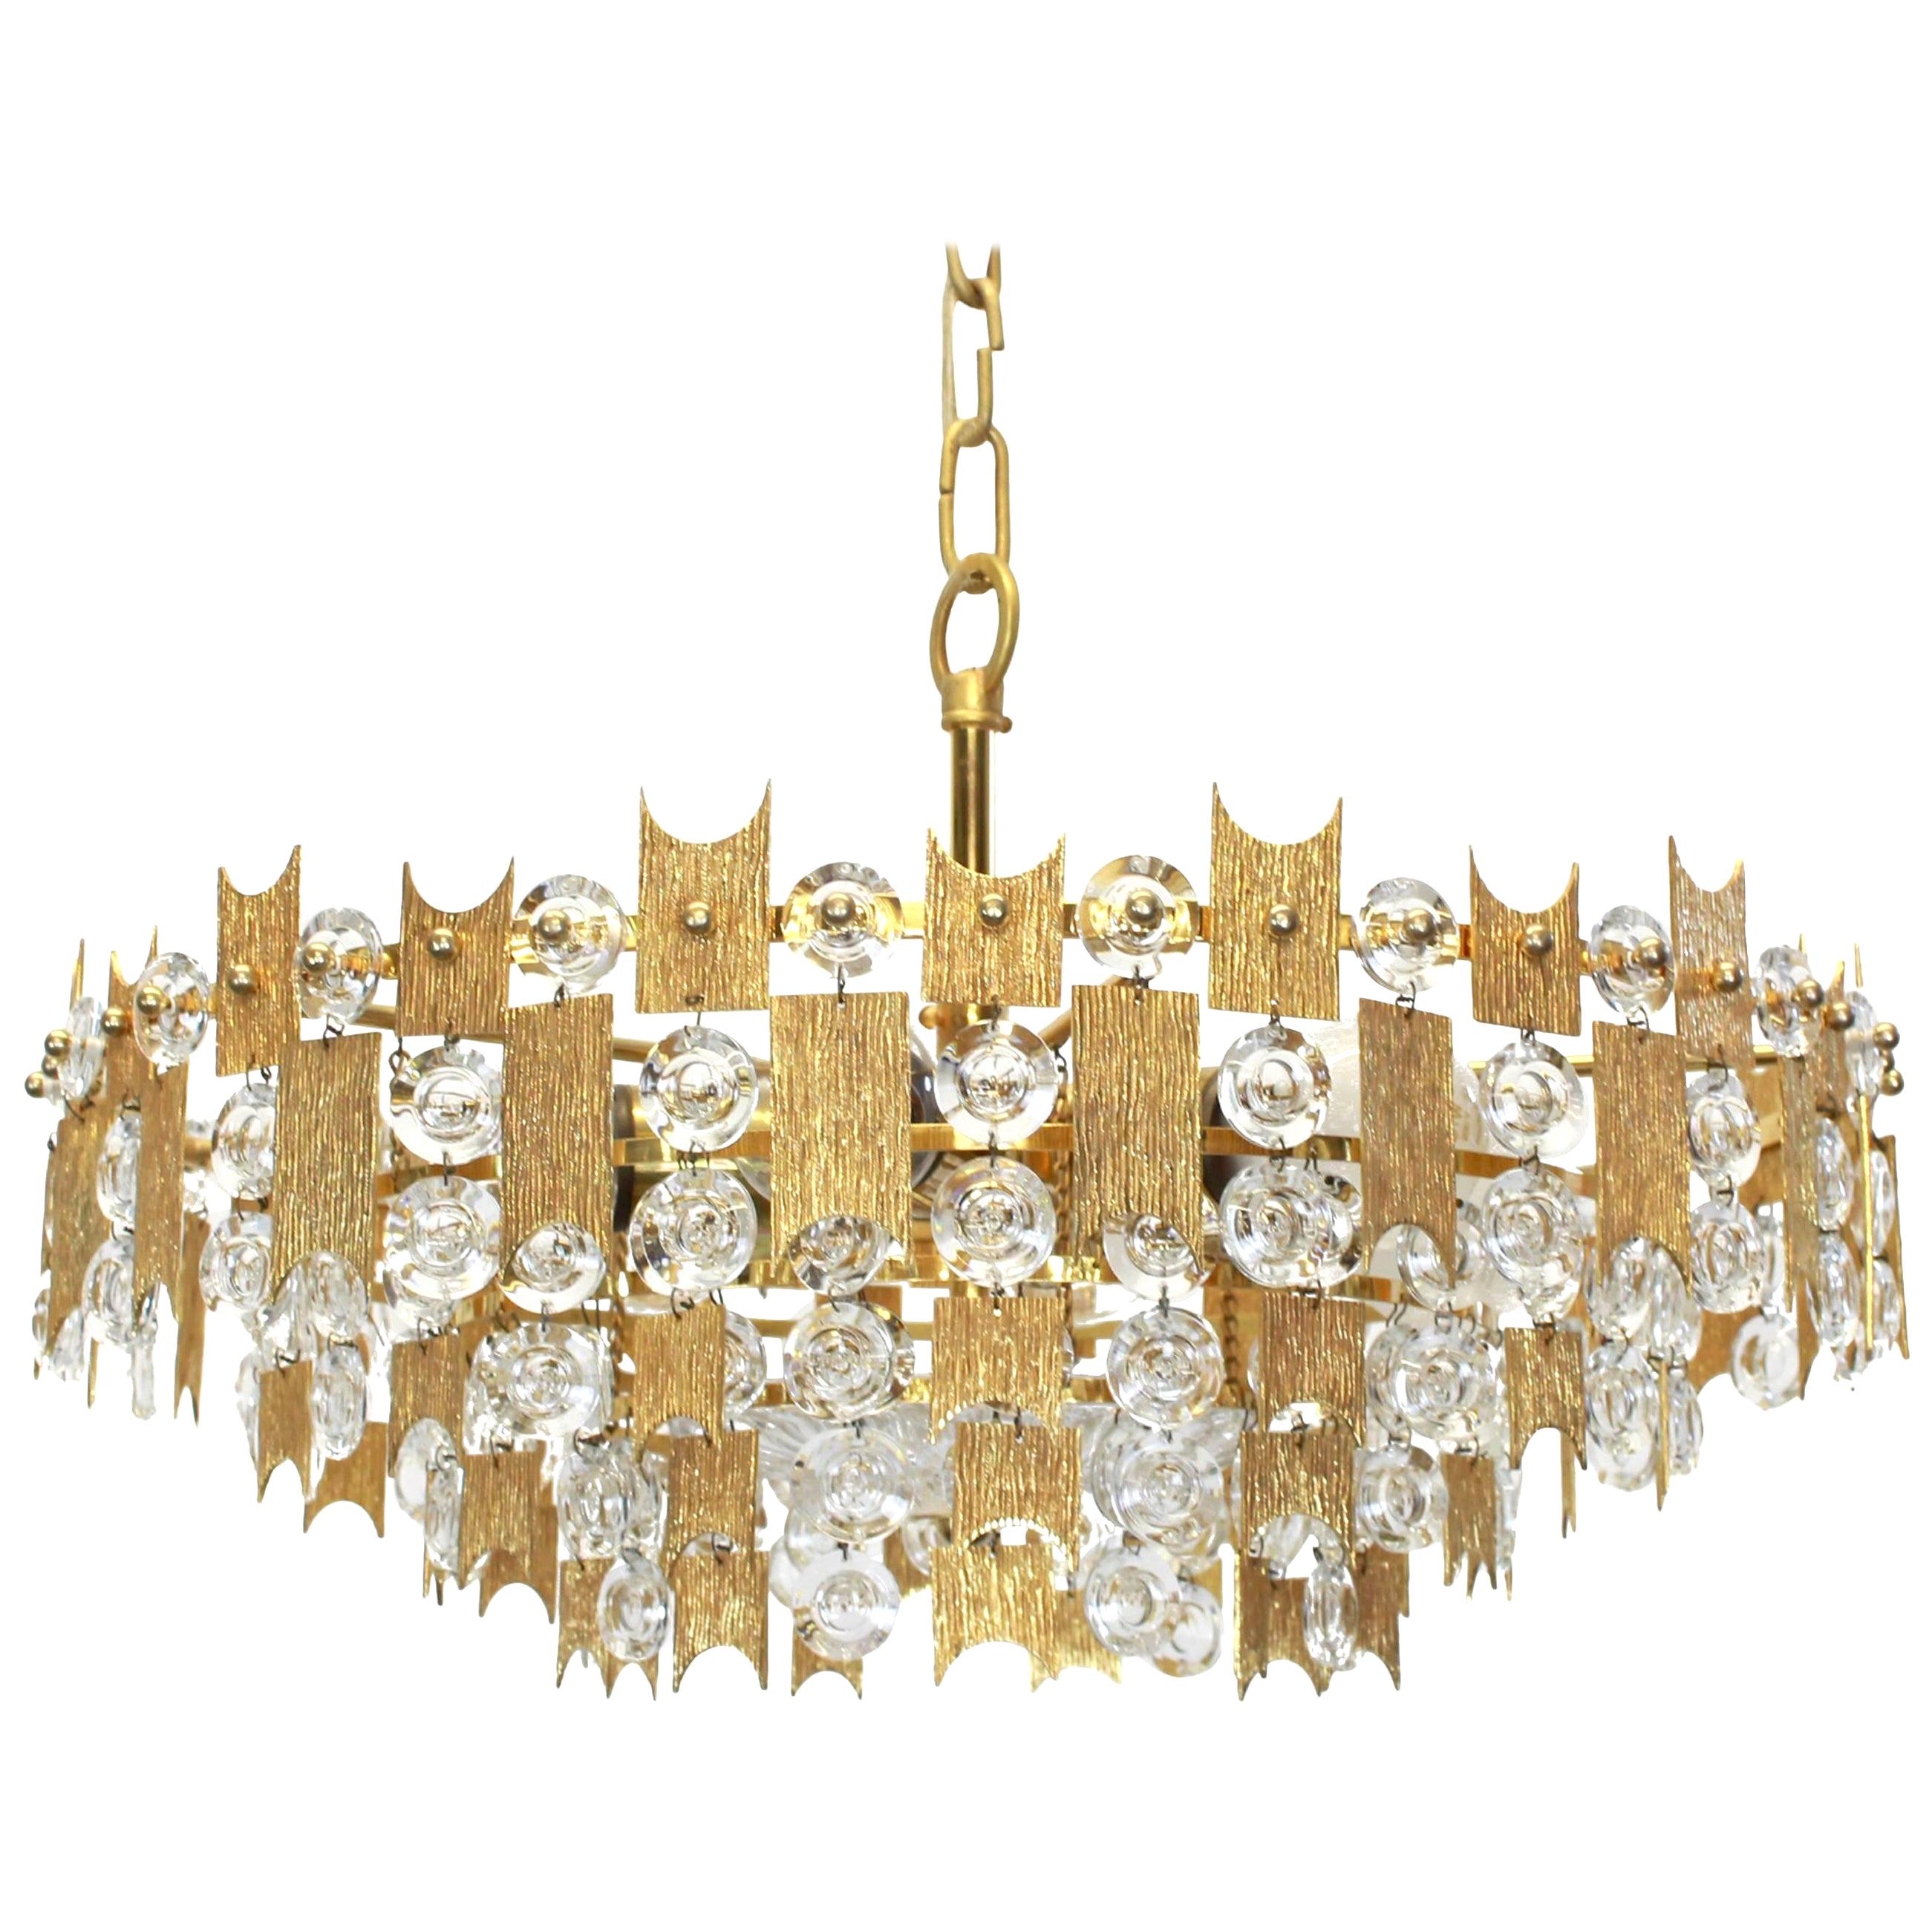 1 of 2 Impressive Large Gilt Brass and Crystal Chandelier- Palwa -Germany, 1960s For Sale